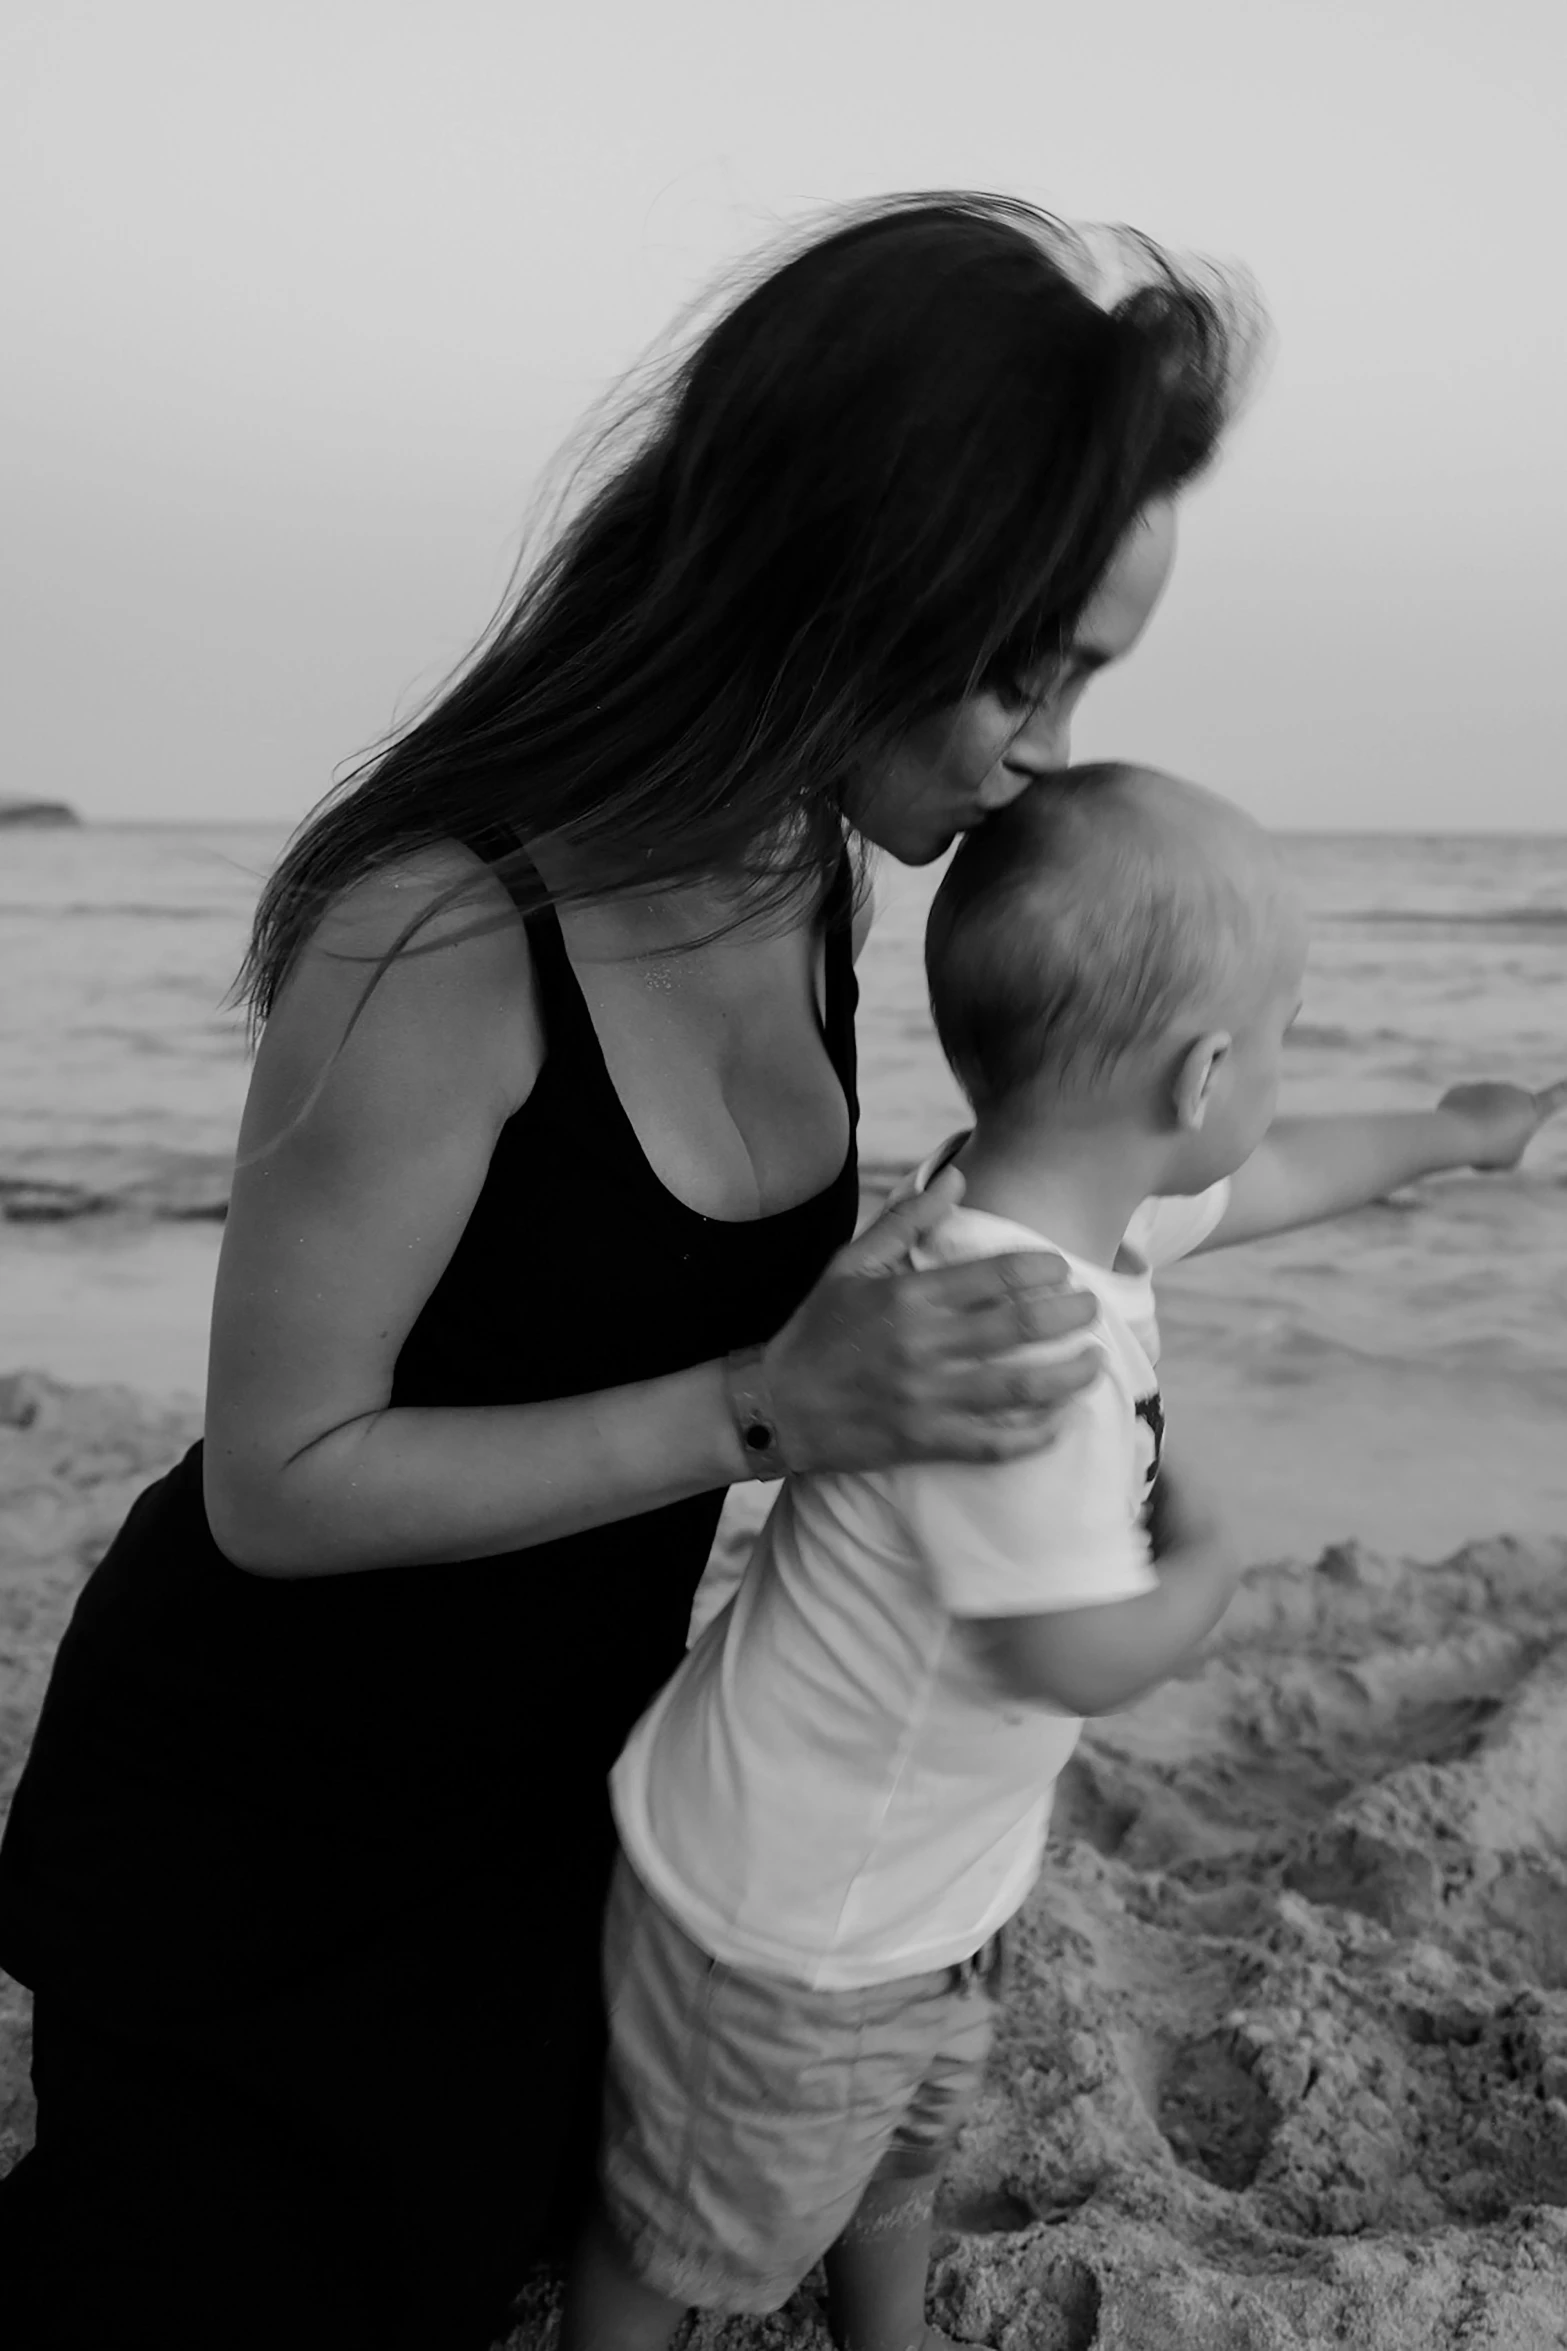 a woman holding a baby on the beach, a black and white photo, angelina jolie, artem chebokha, profile image, video